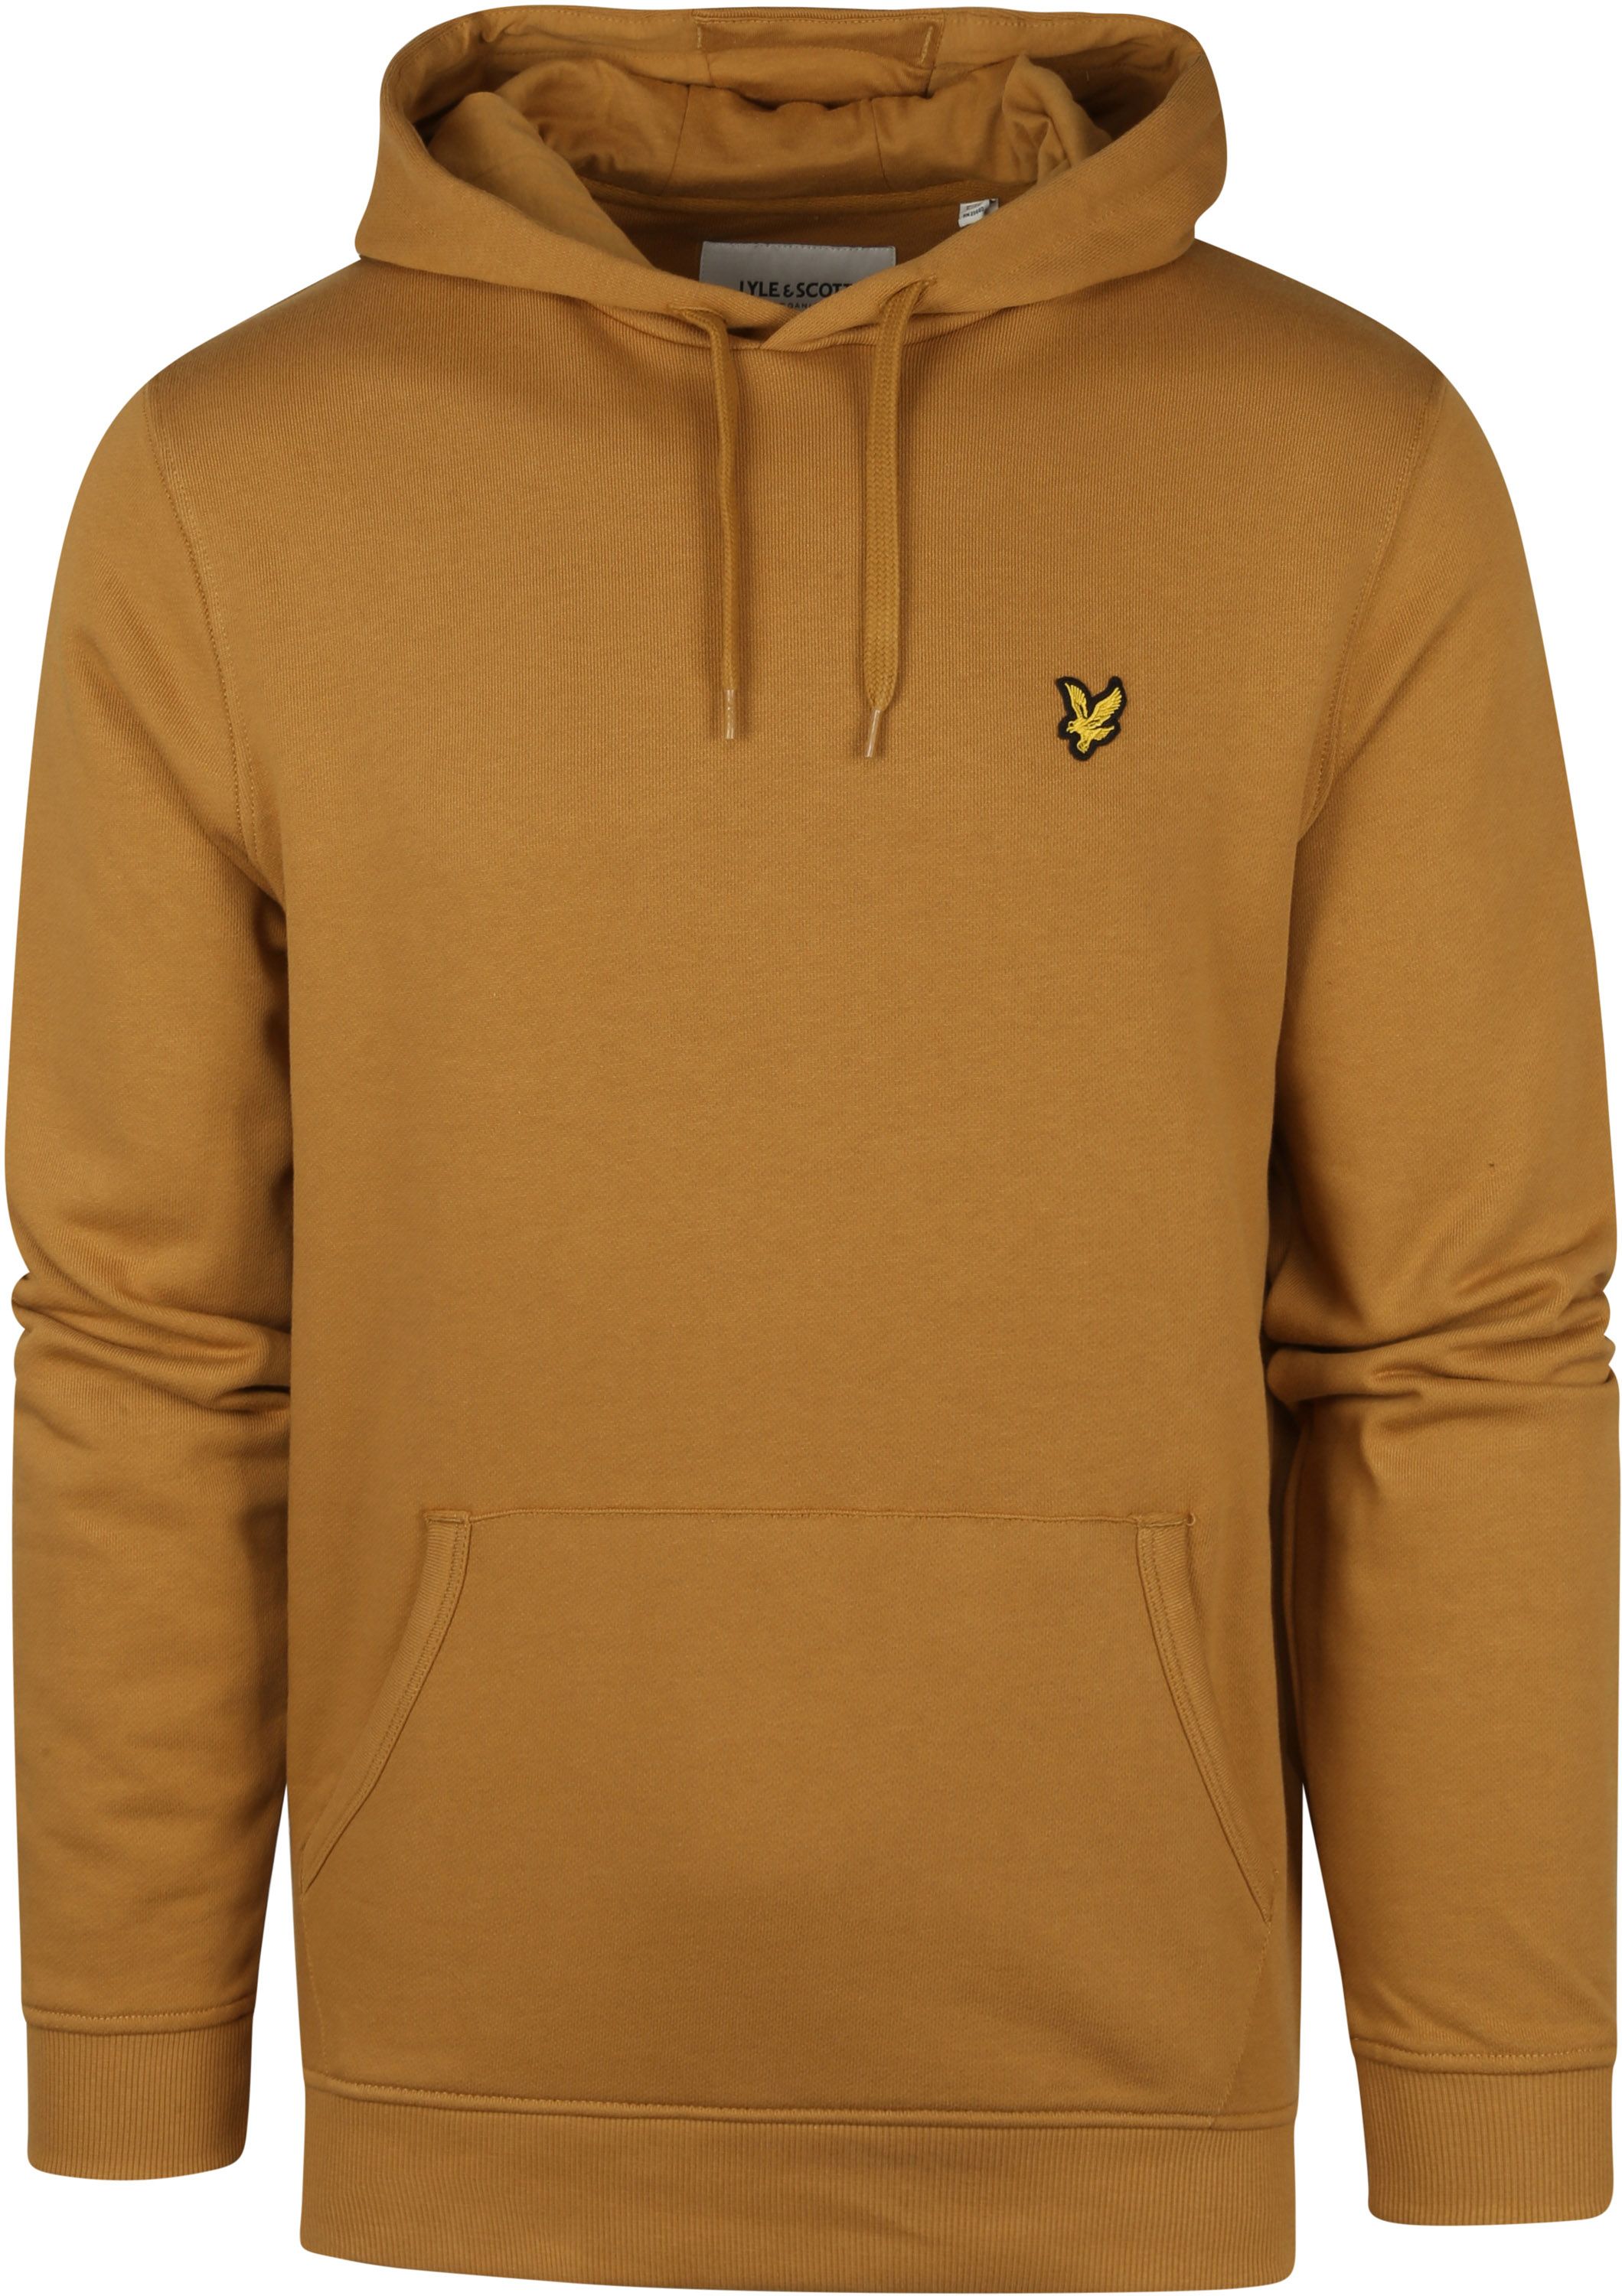 Lyle and Scott Hoodie Ochre Yellow size L